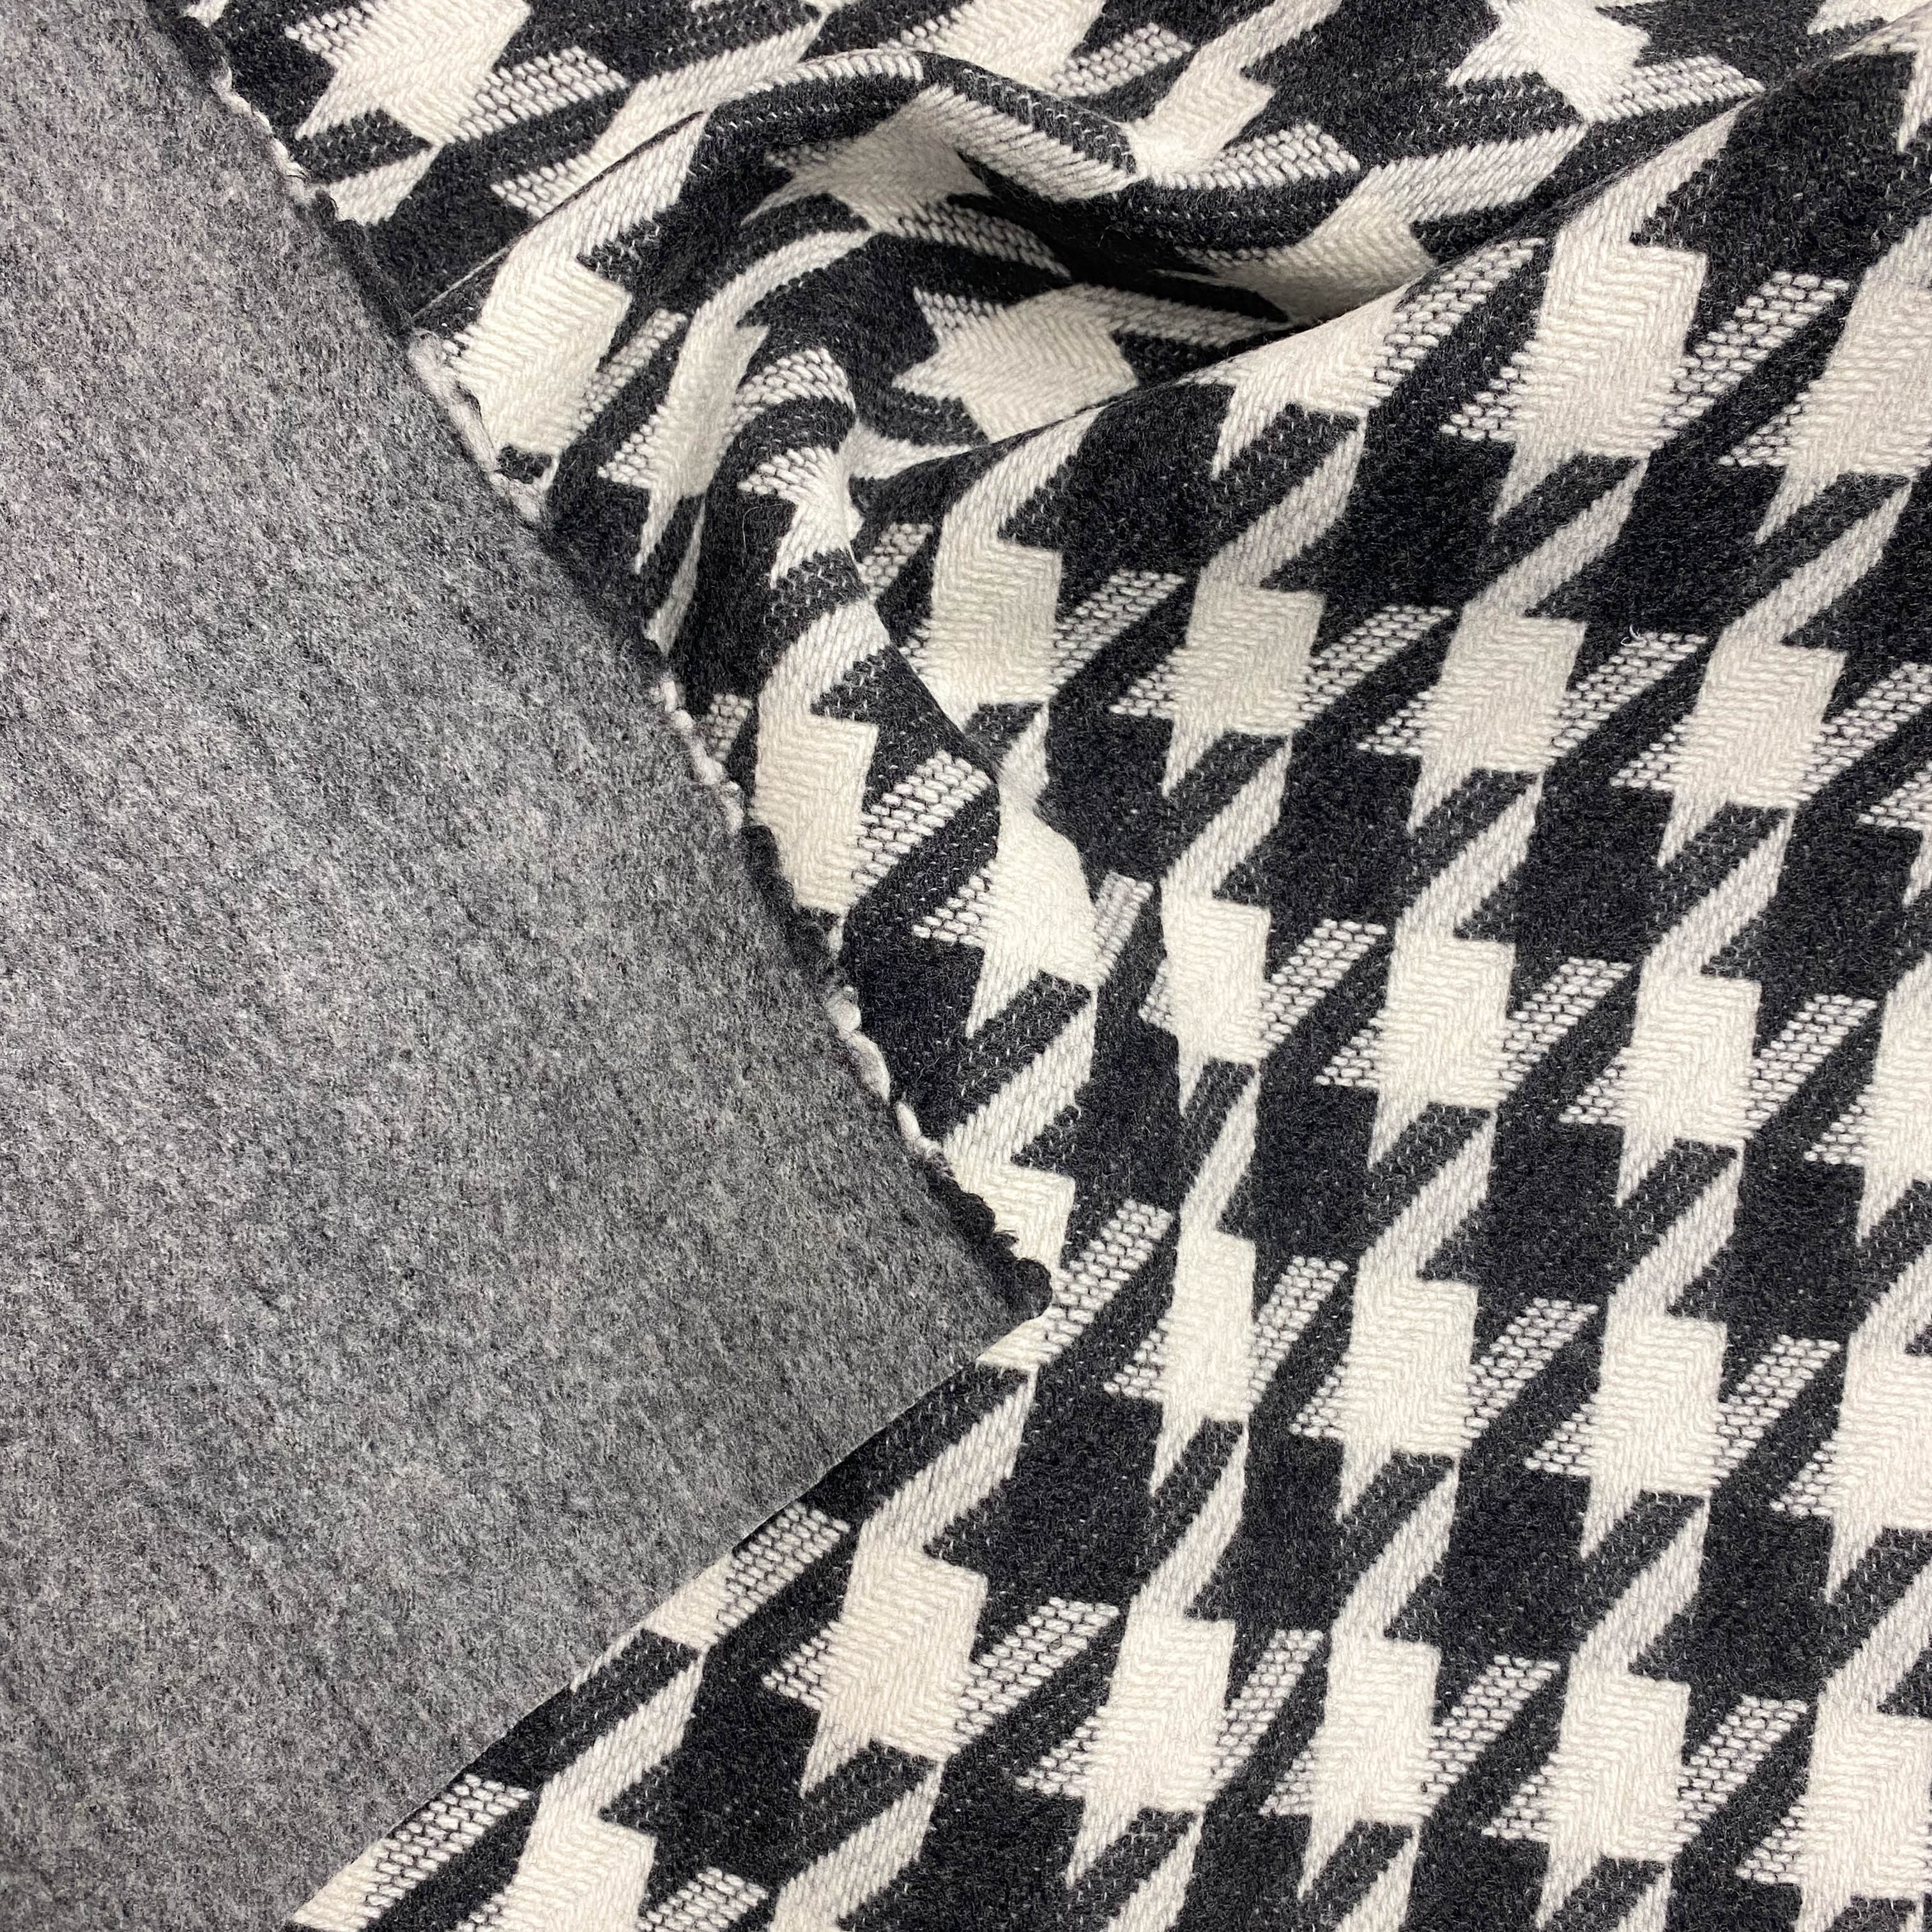 No. 473 coat fabric doubleface houndstooth with cashmere